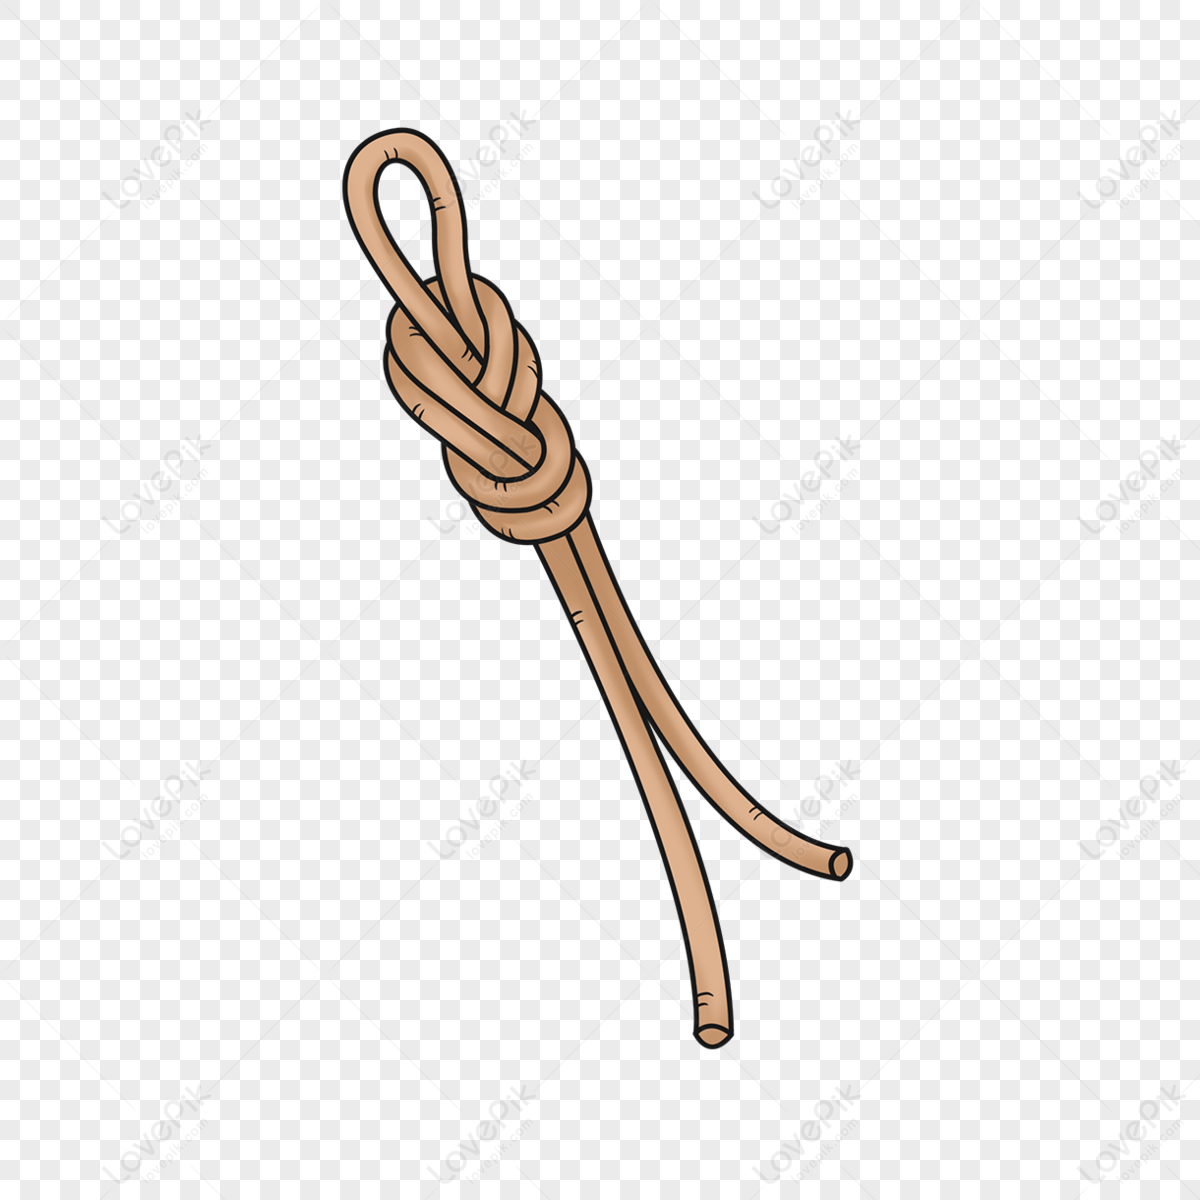 Binding And Knotted Long Strong Rope, Safety Rope, Tie, Cord PNG  Transparent Image and Clipart for Free Download